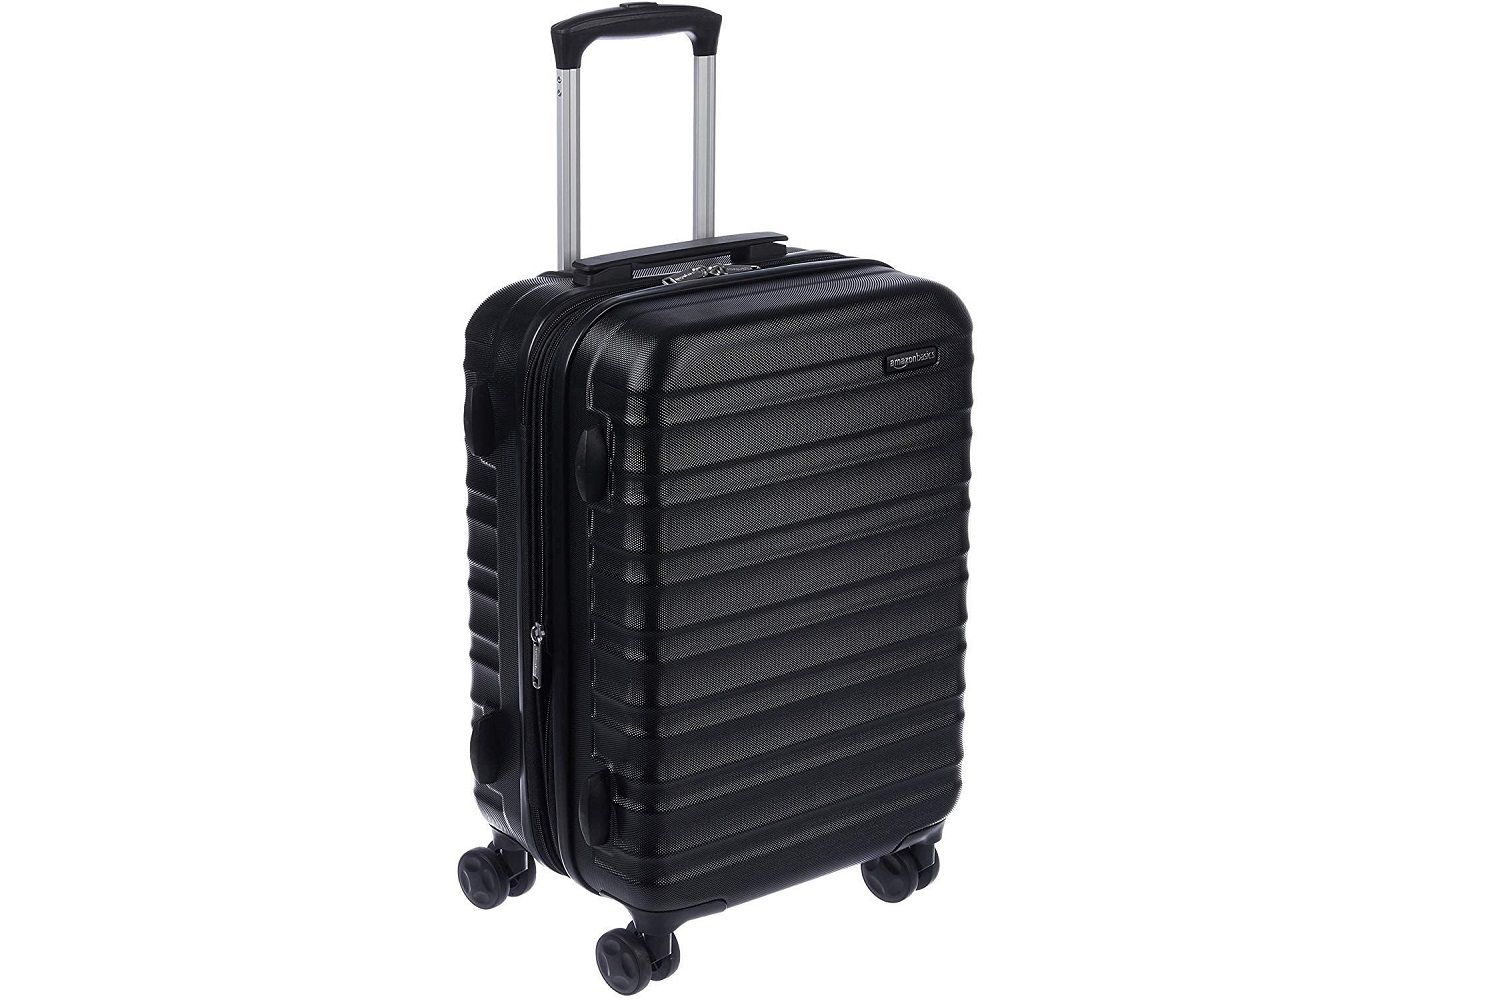 The BEST Affordable Carry-On Luggage